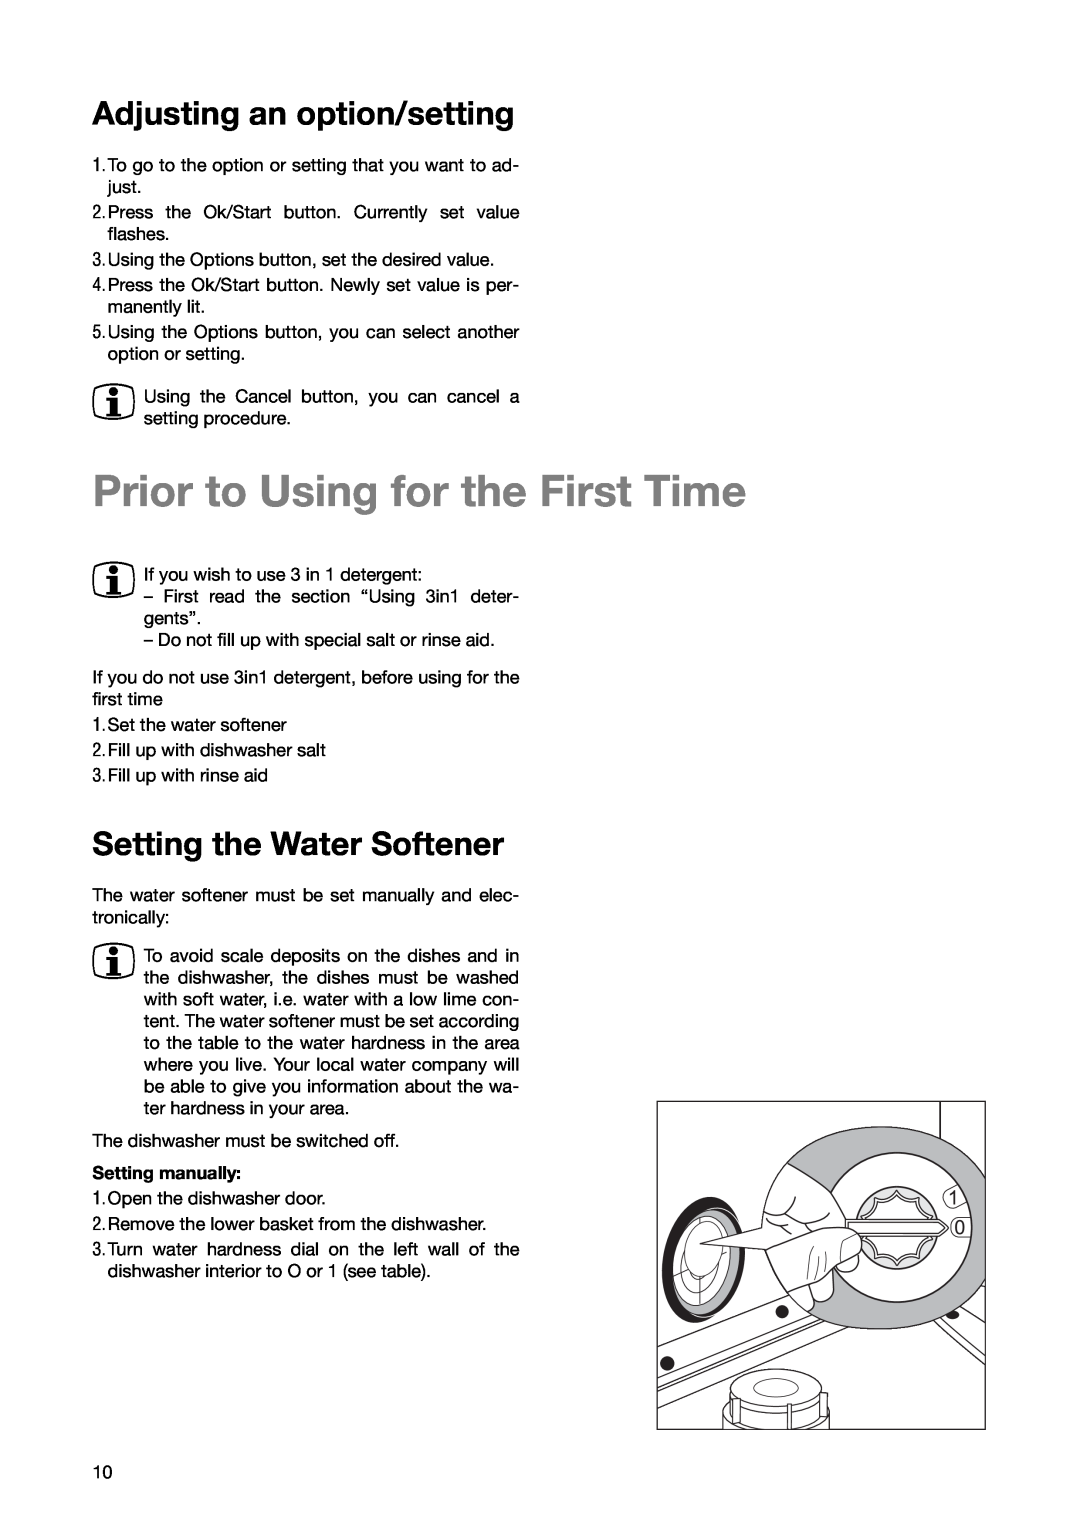 Zanussi ZSF 6280 manual Prior to Using for the First Time, Adjusting an option/setting, Setting the Water Softener 